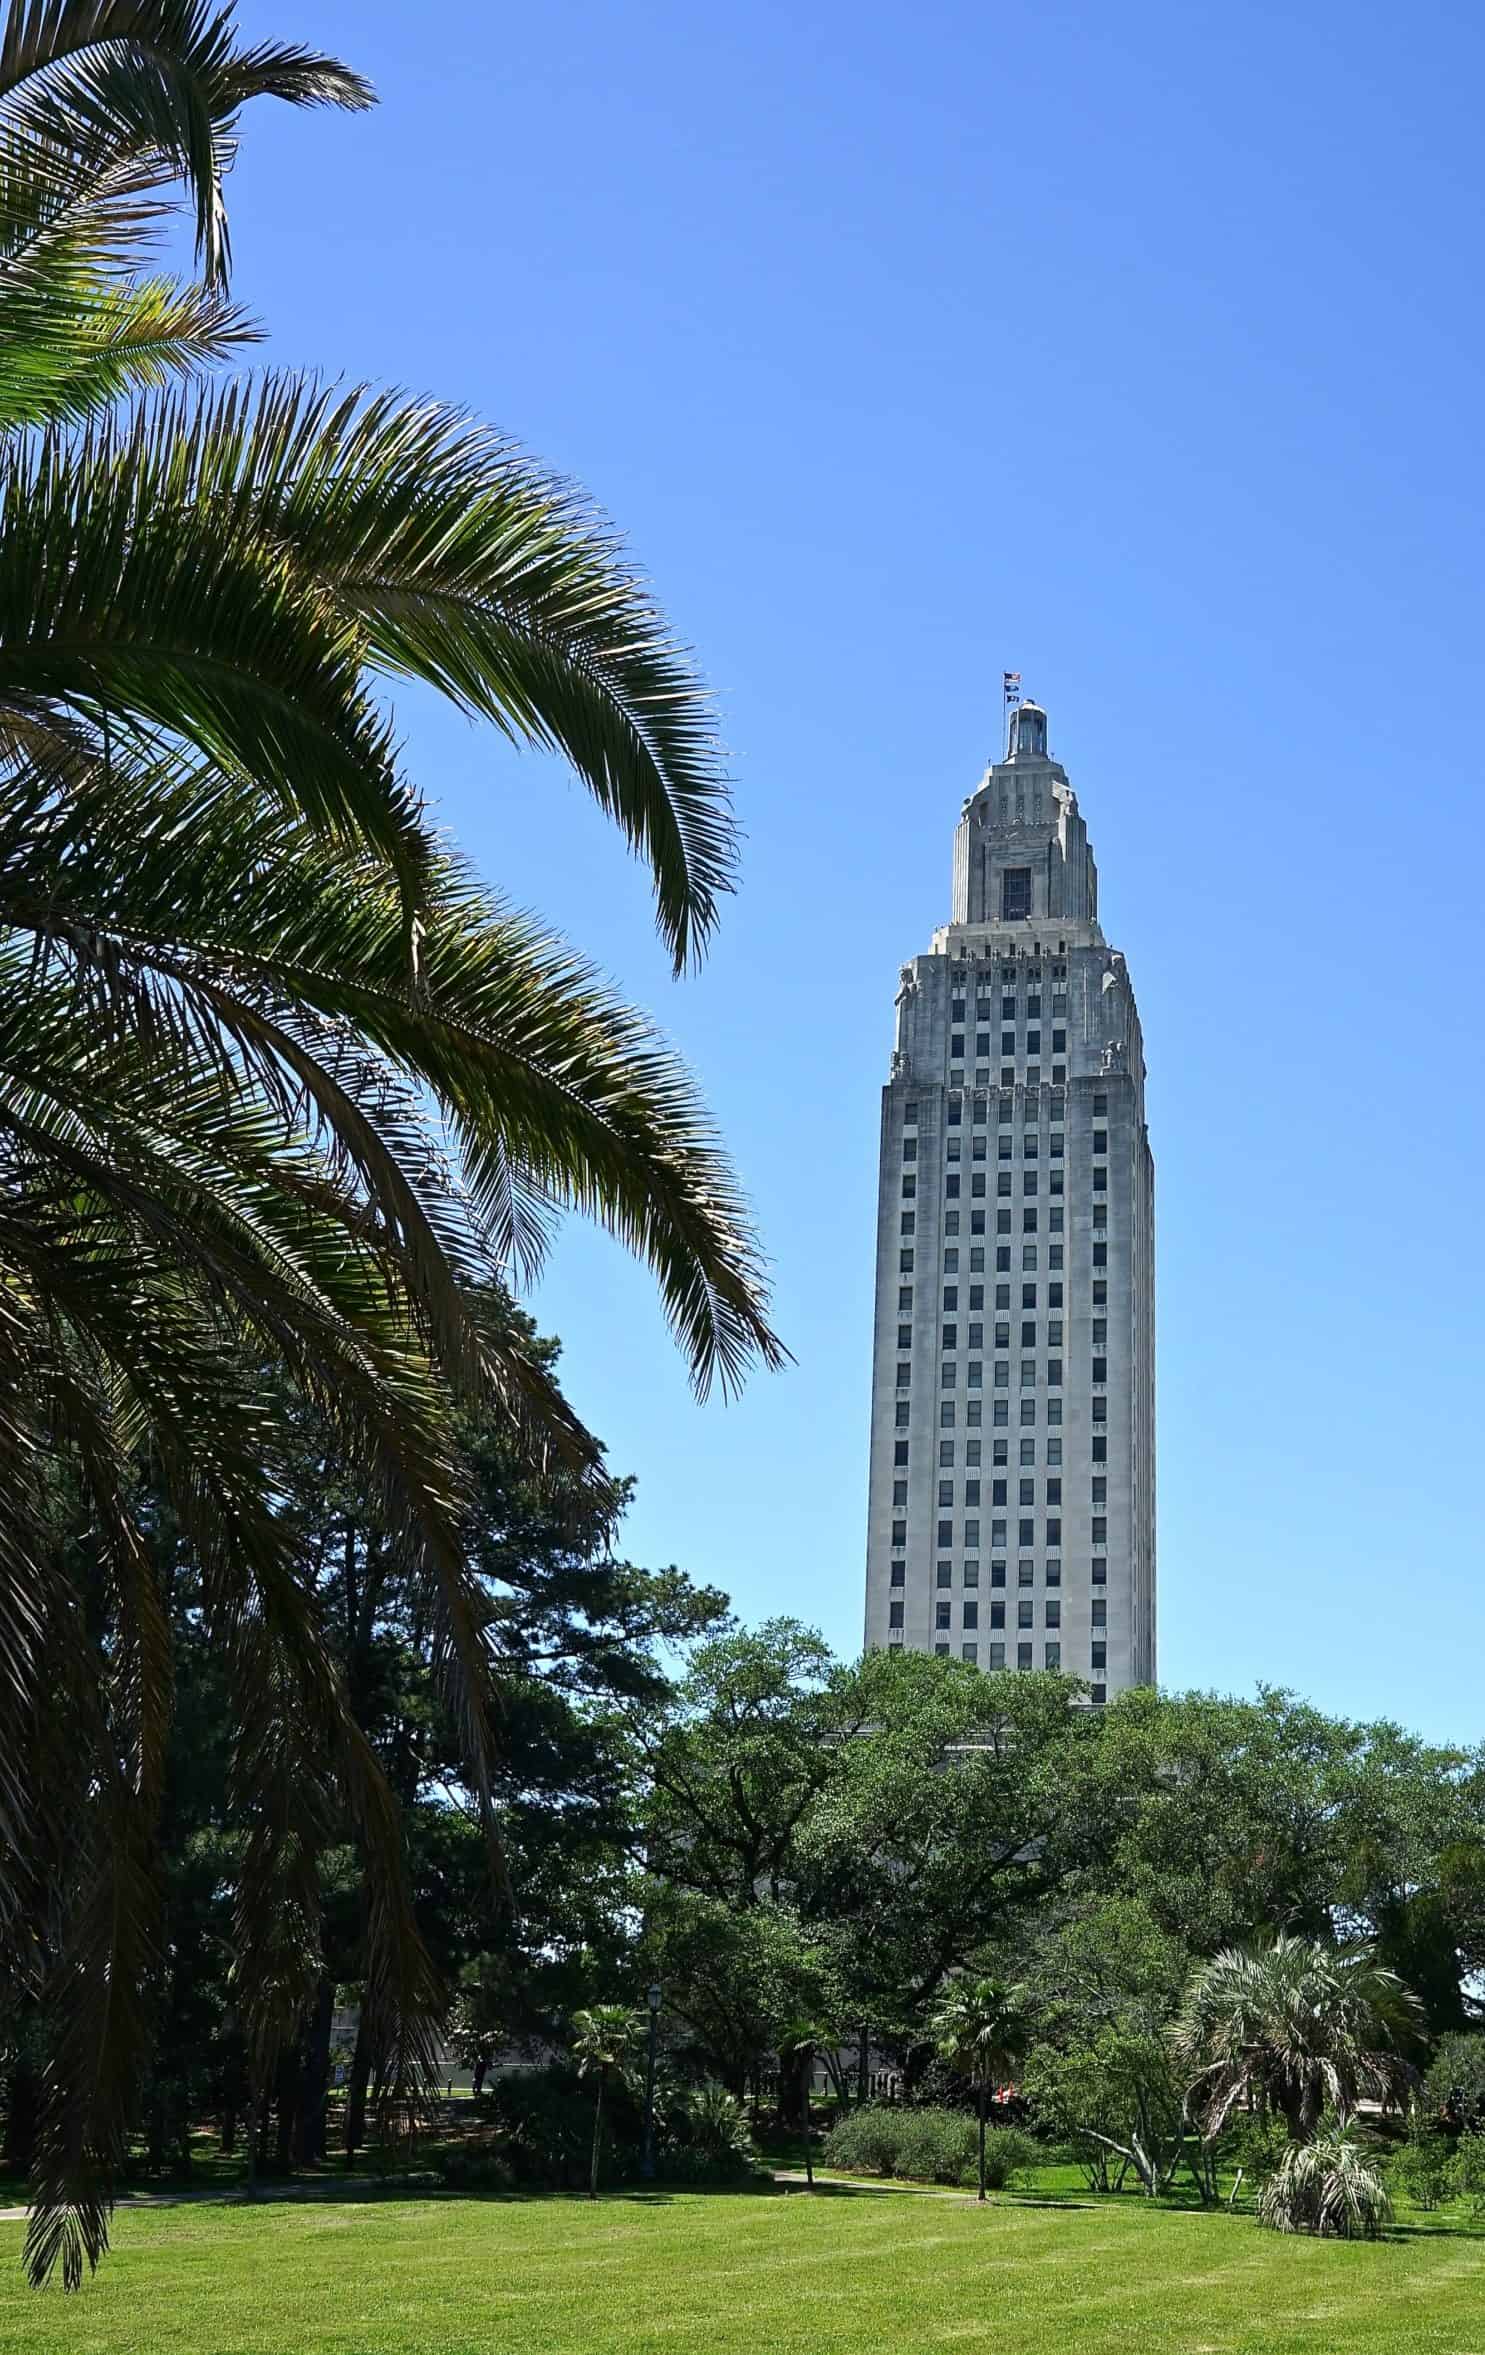 Louisiana's Top Pet Friendly Attraction: State Capitol Grounds